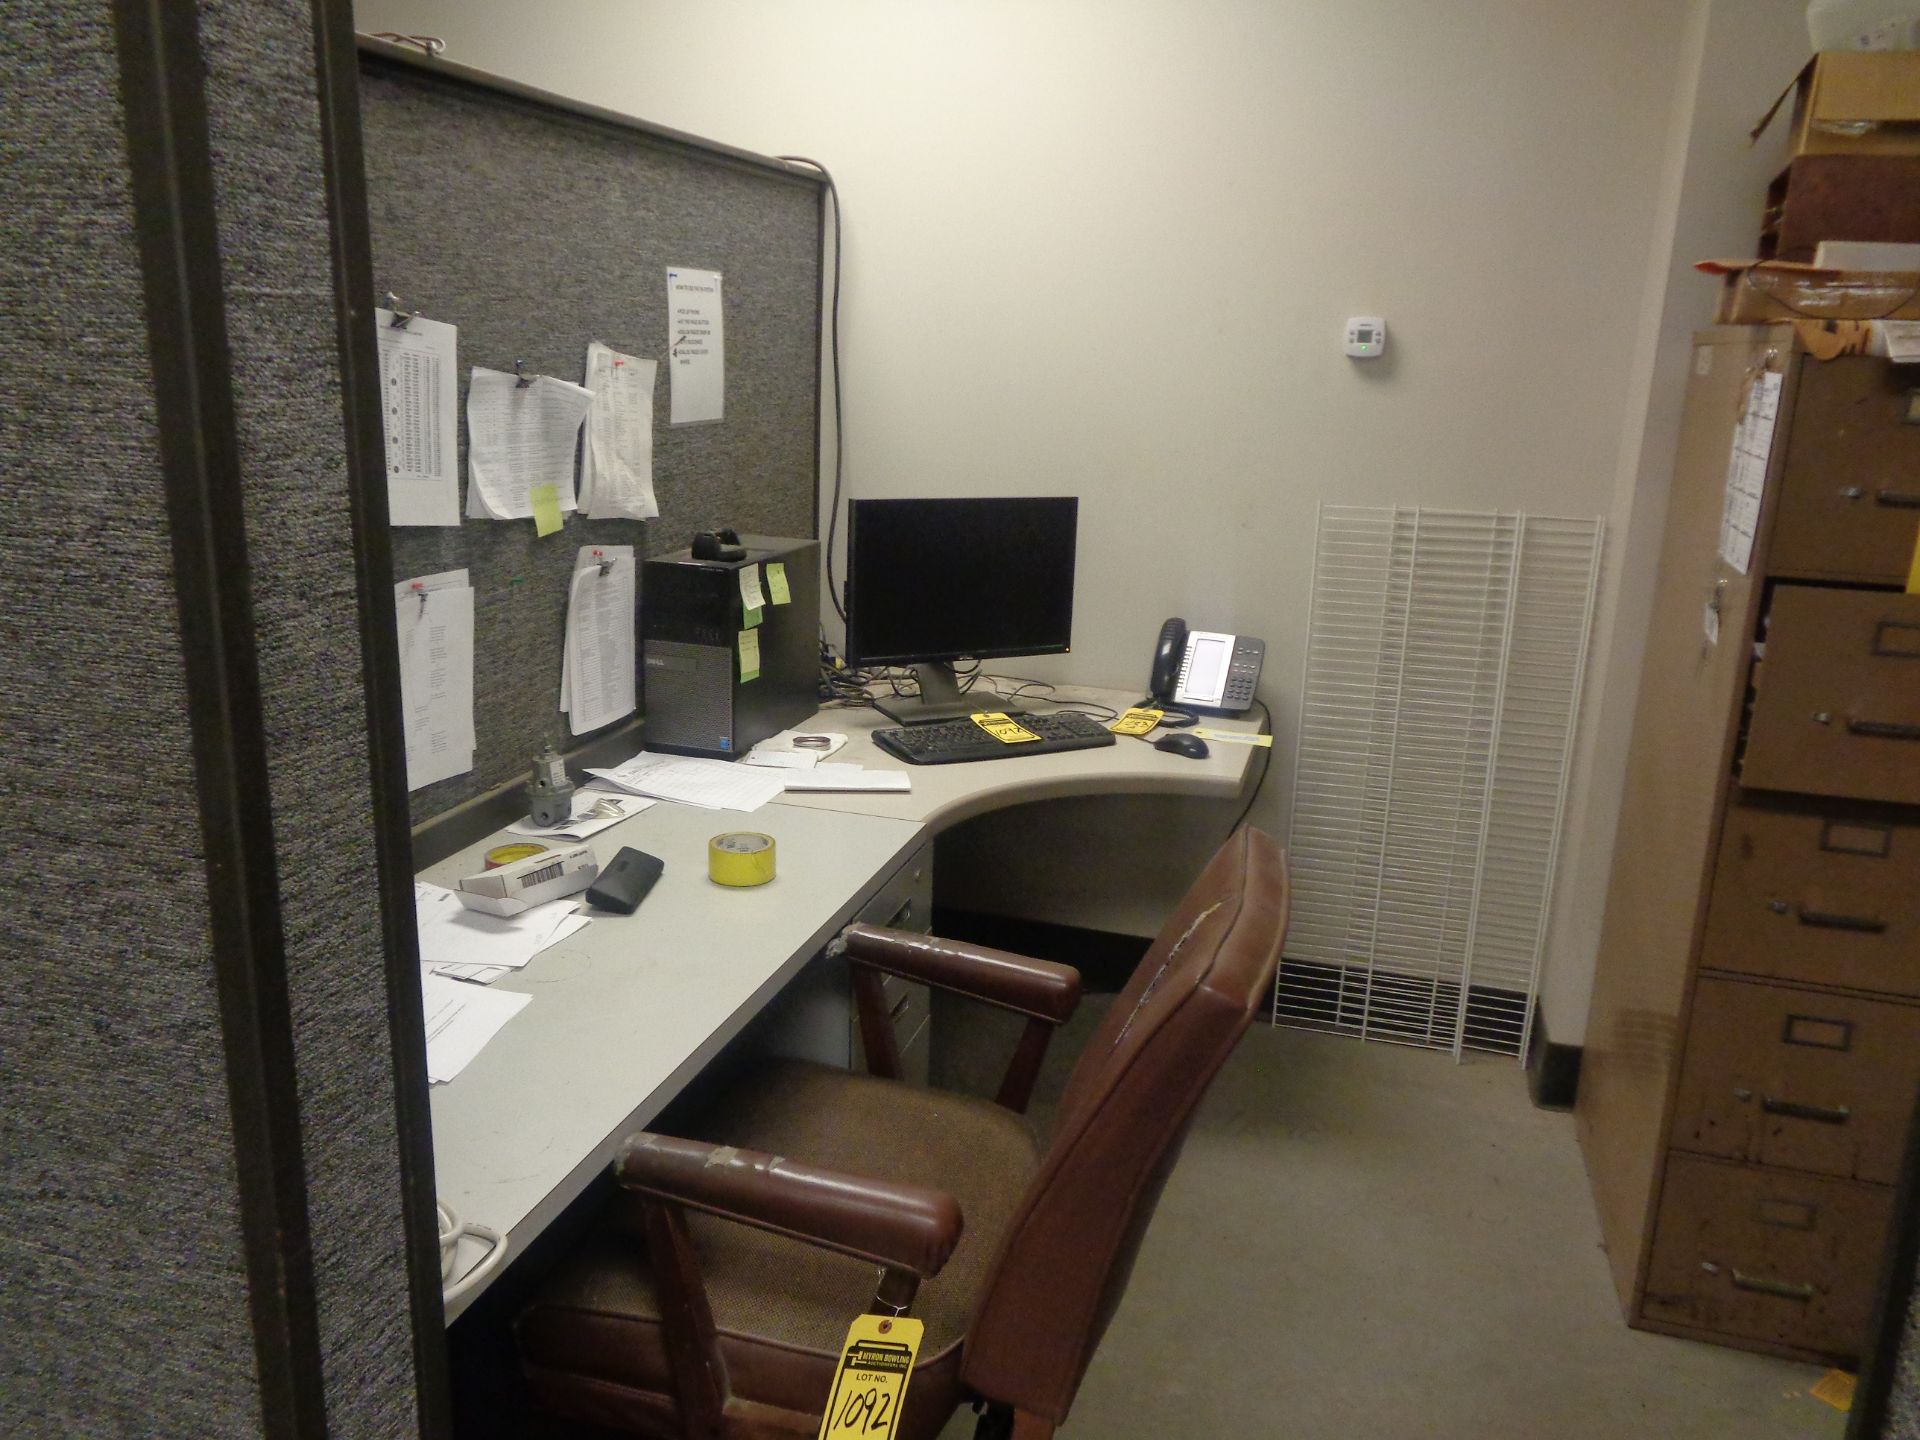 CONTENTS OF OFFICE CUBE; FILE CABINETS, DESK, AND CHAIR